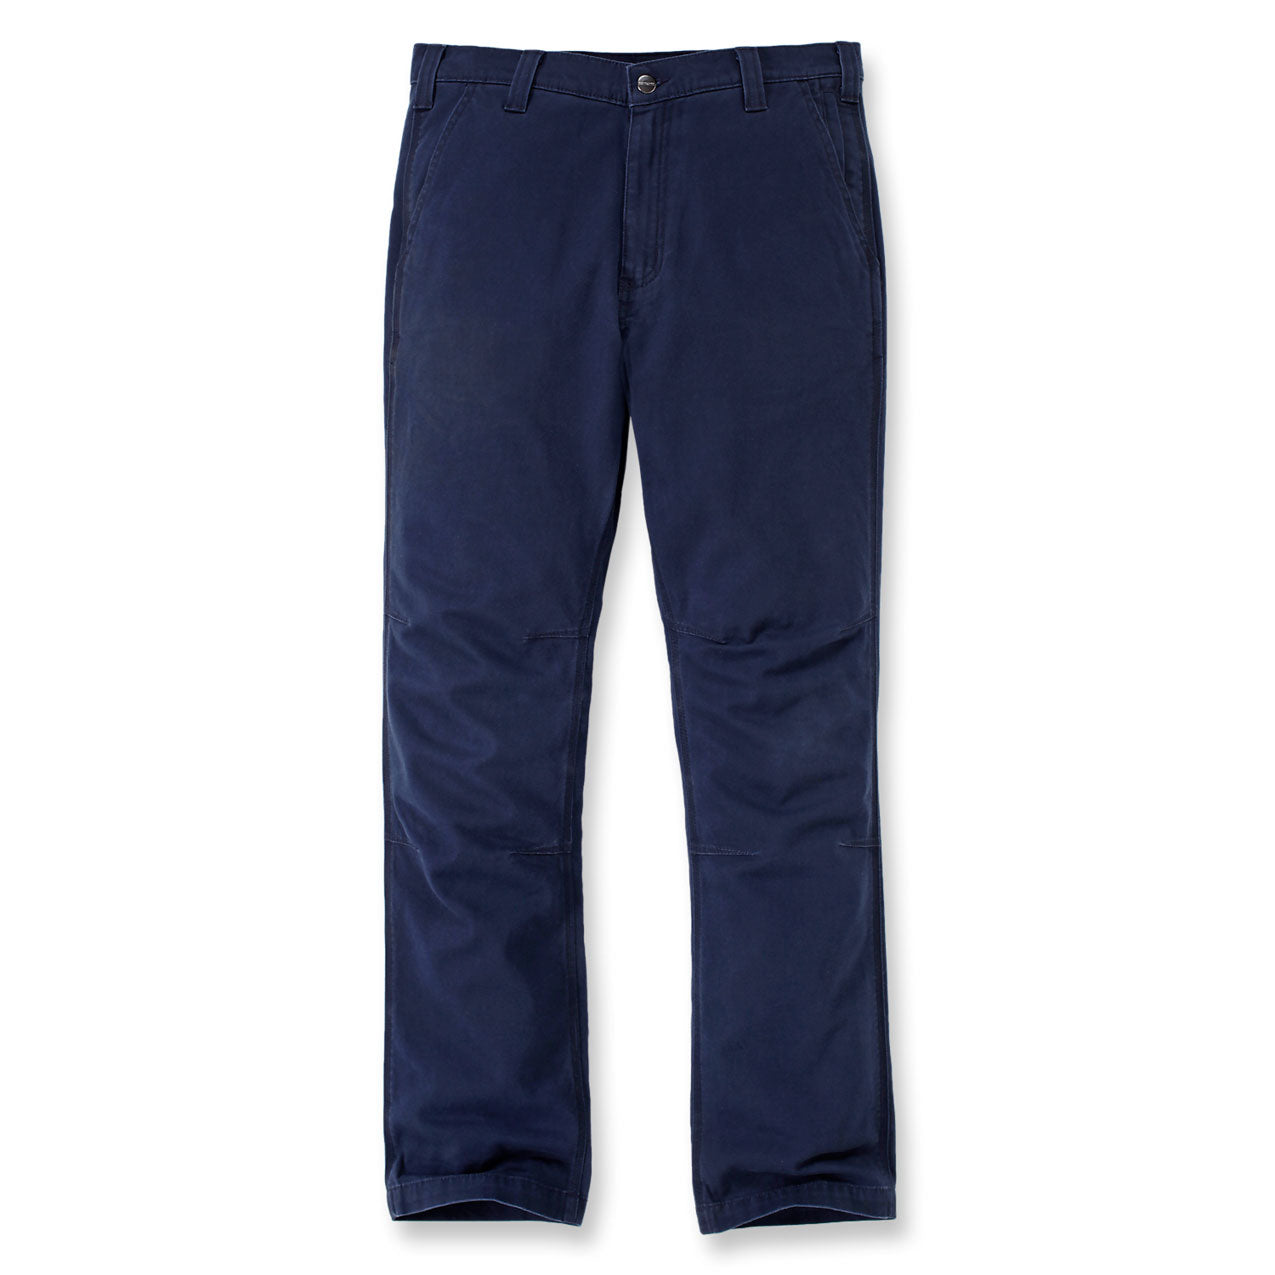 RUGGED FLEX RIGBY STRAIGHT FIT PANT Navy